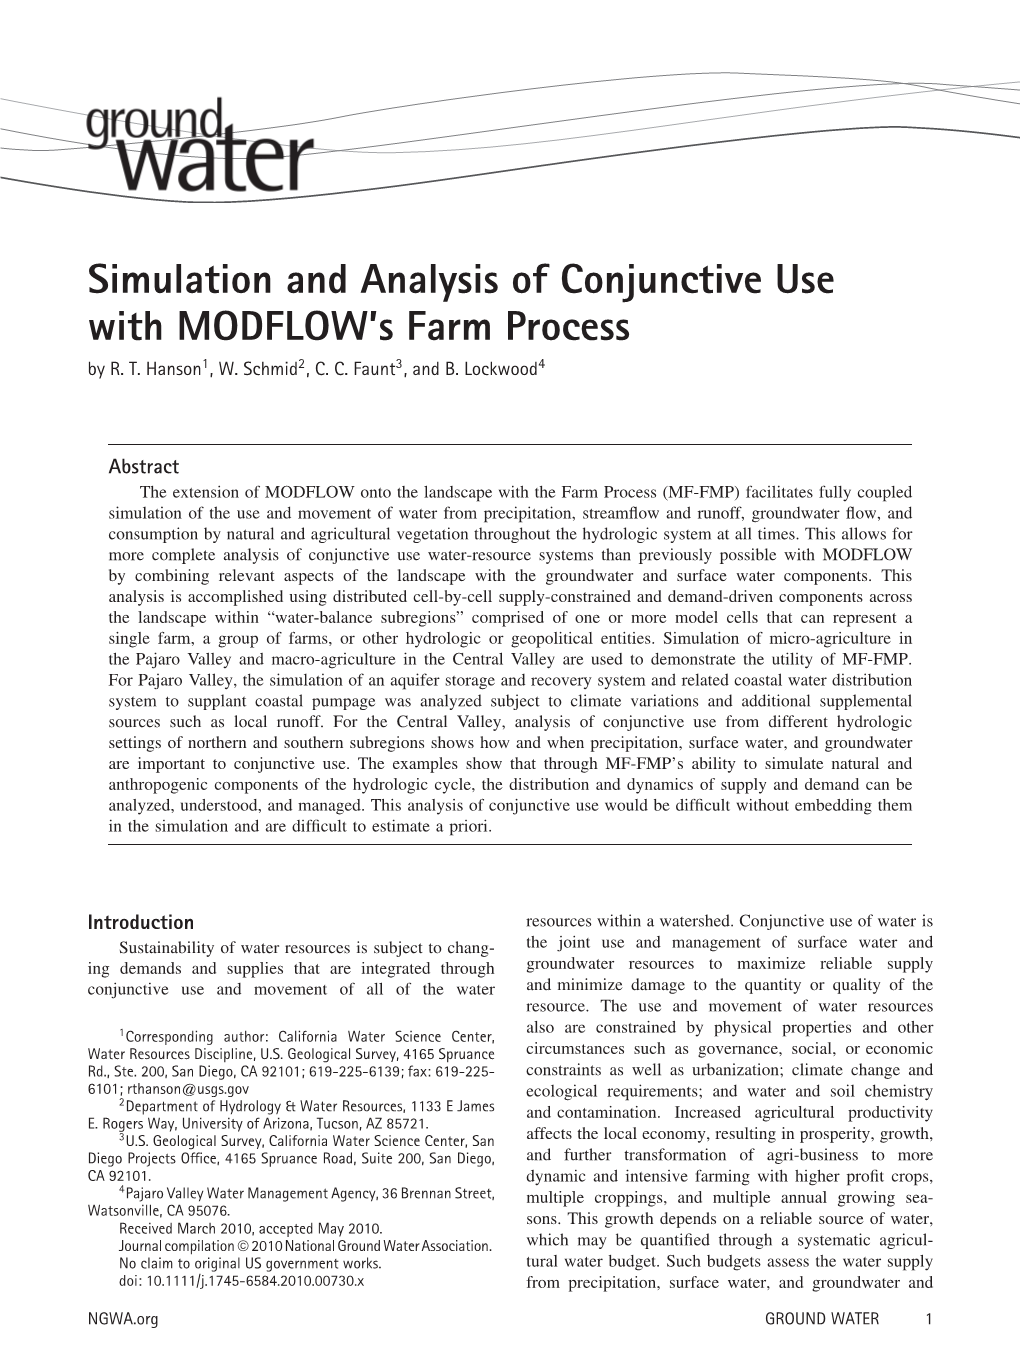 Simulation and Analysis of Conjunctive Use with MODFLOW's